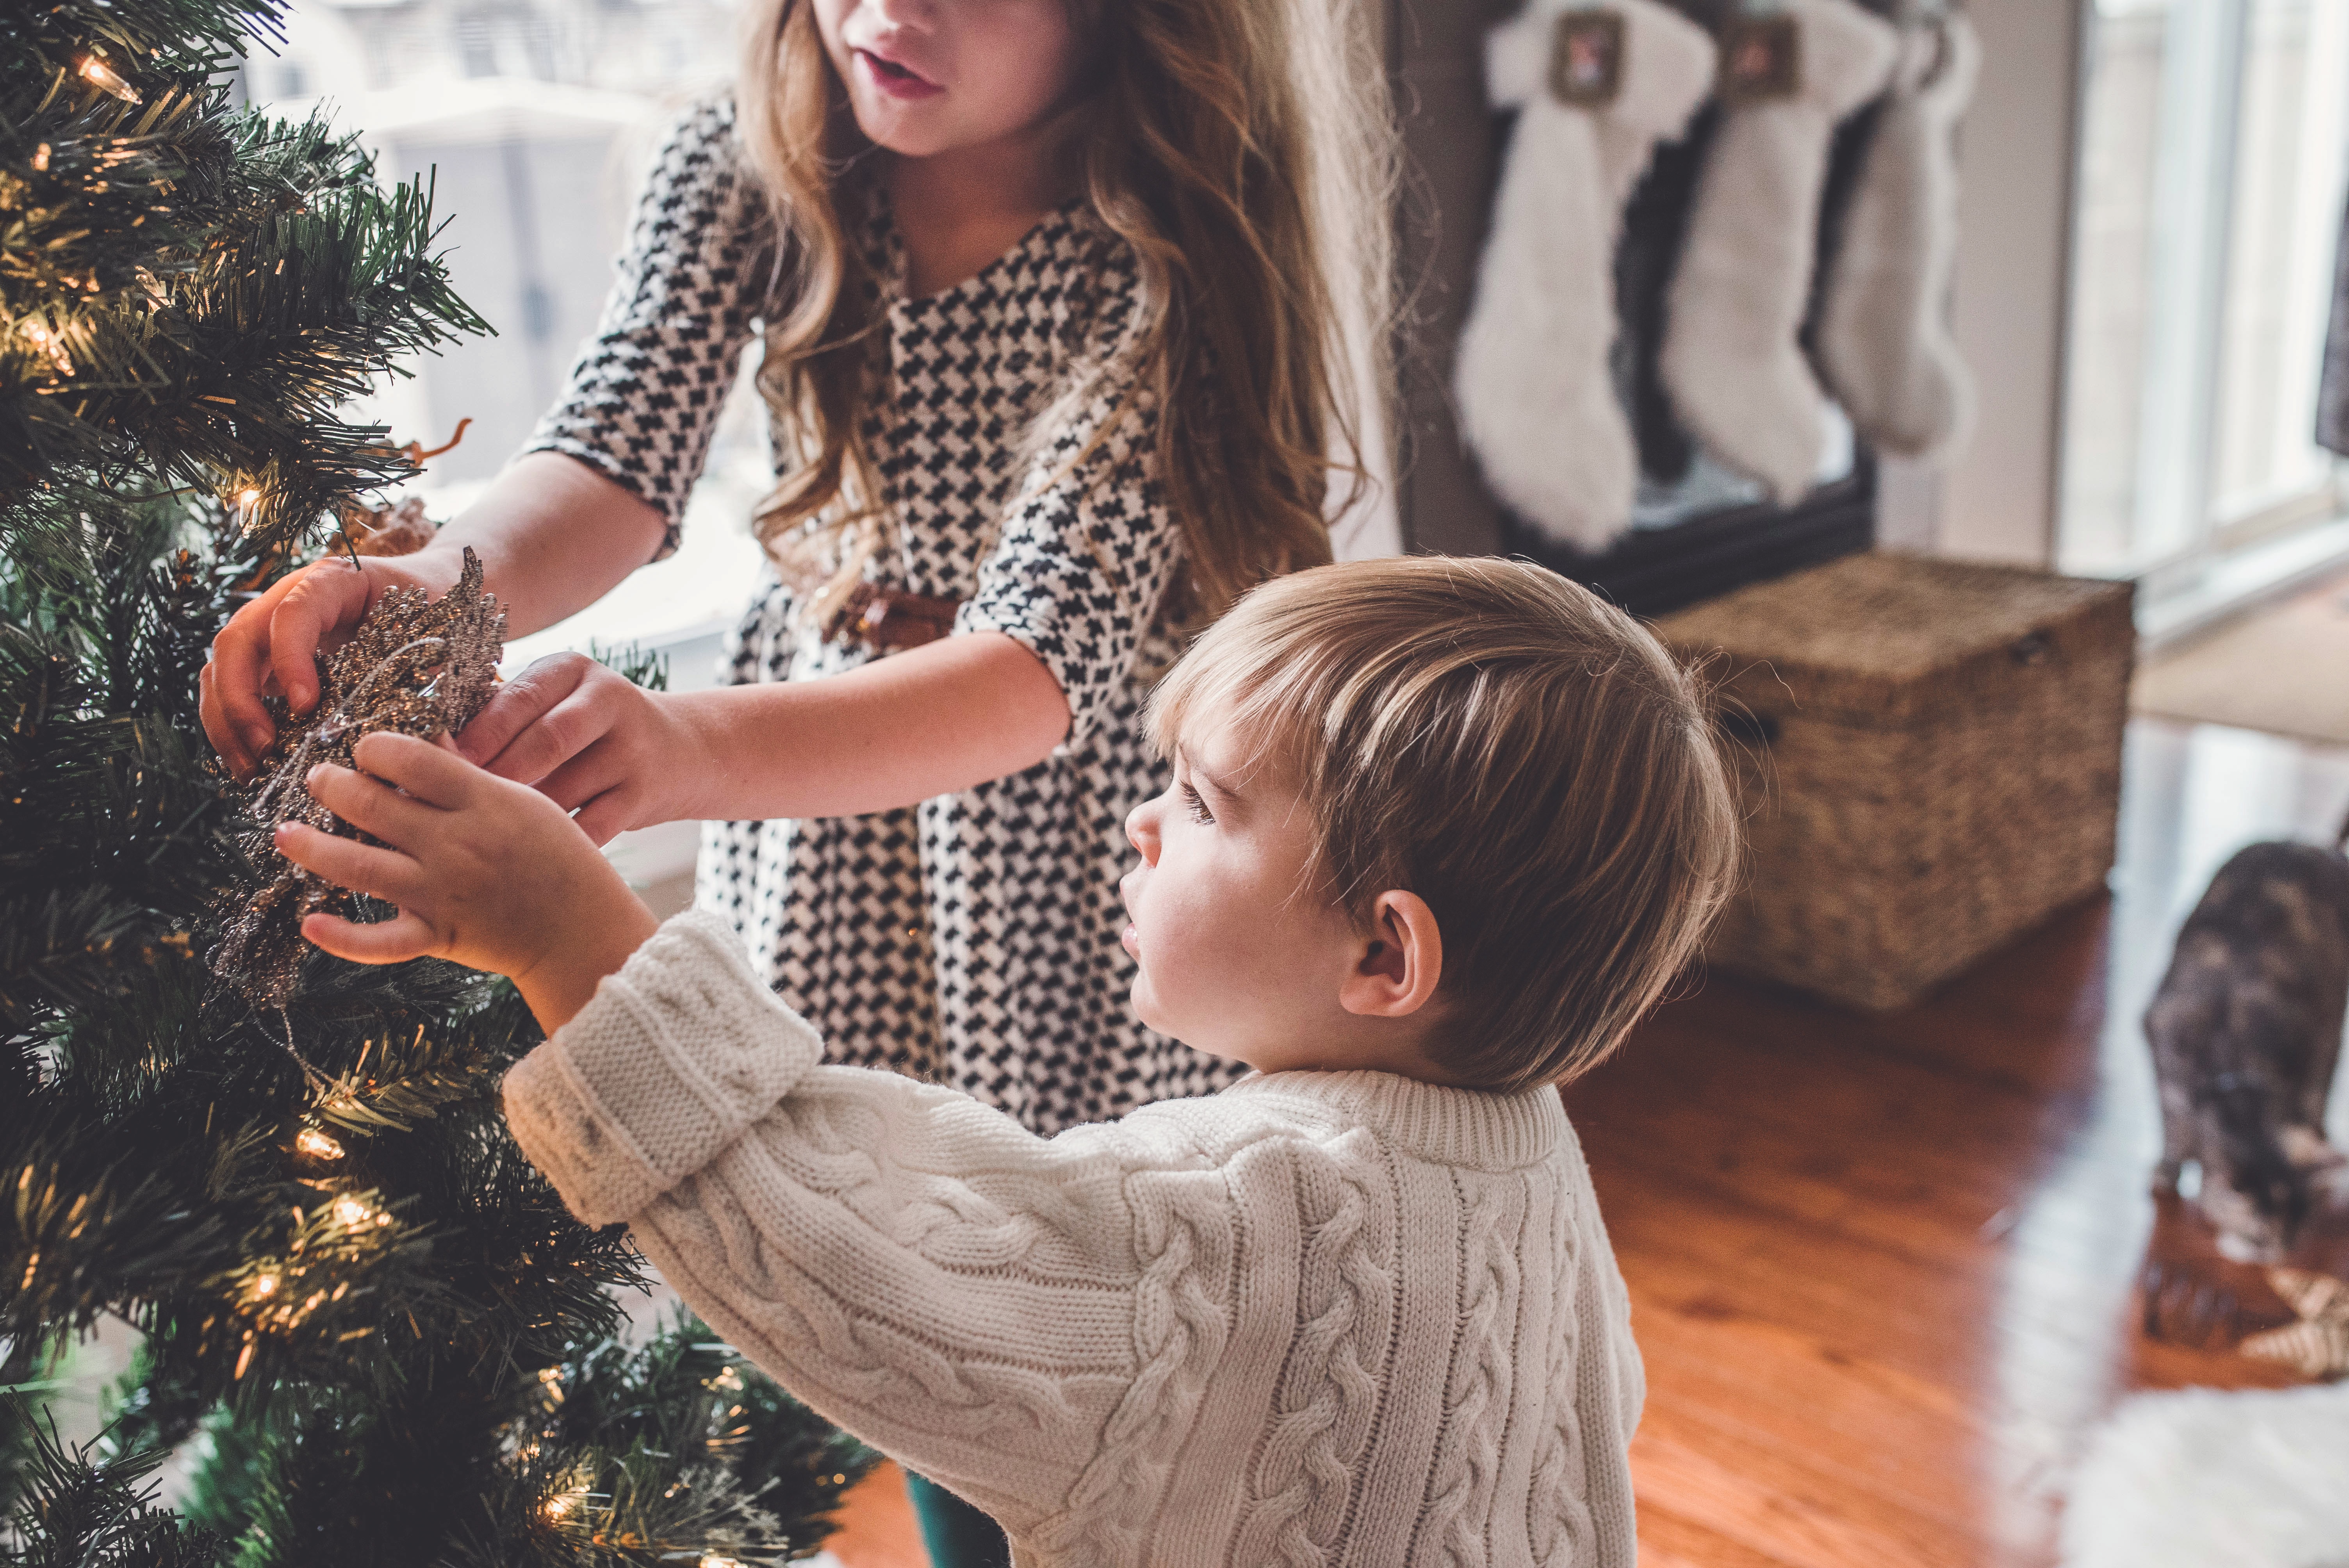 How to Help Your Children Through the Holidays During Your Divorce - Collaborative Practice San Diego - holidays, divorce, collaborative divorce, children of divorce - Photo by Paige Cody on Unsplash